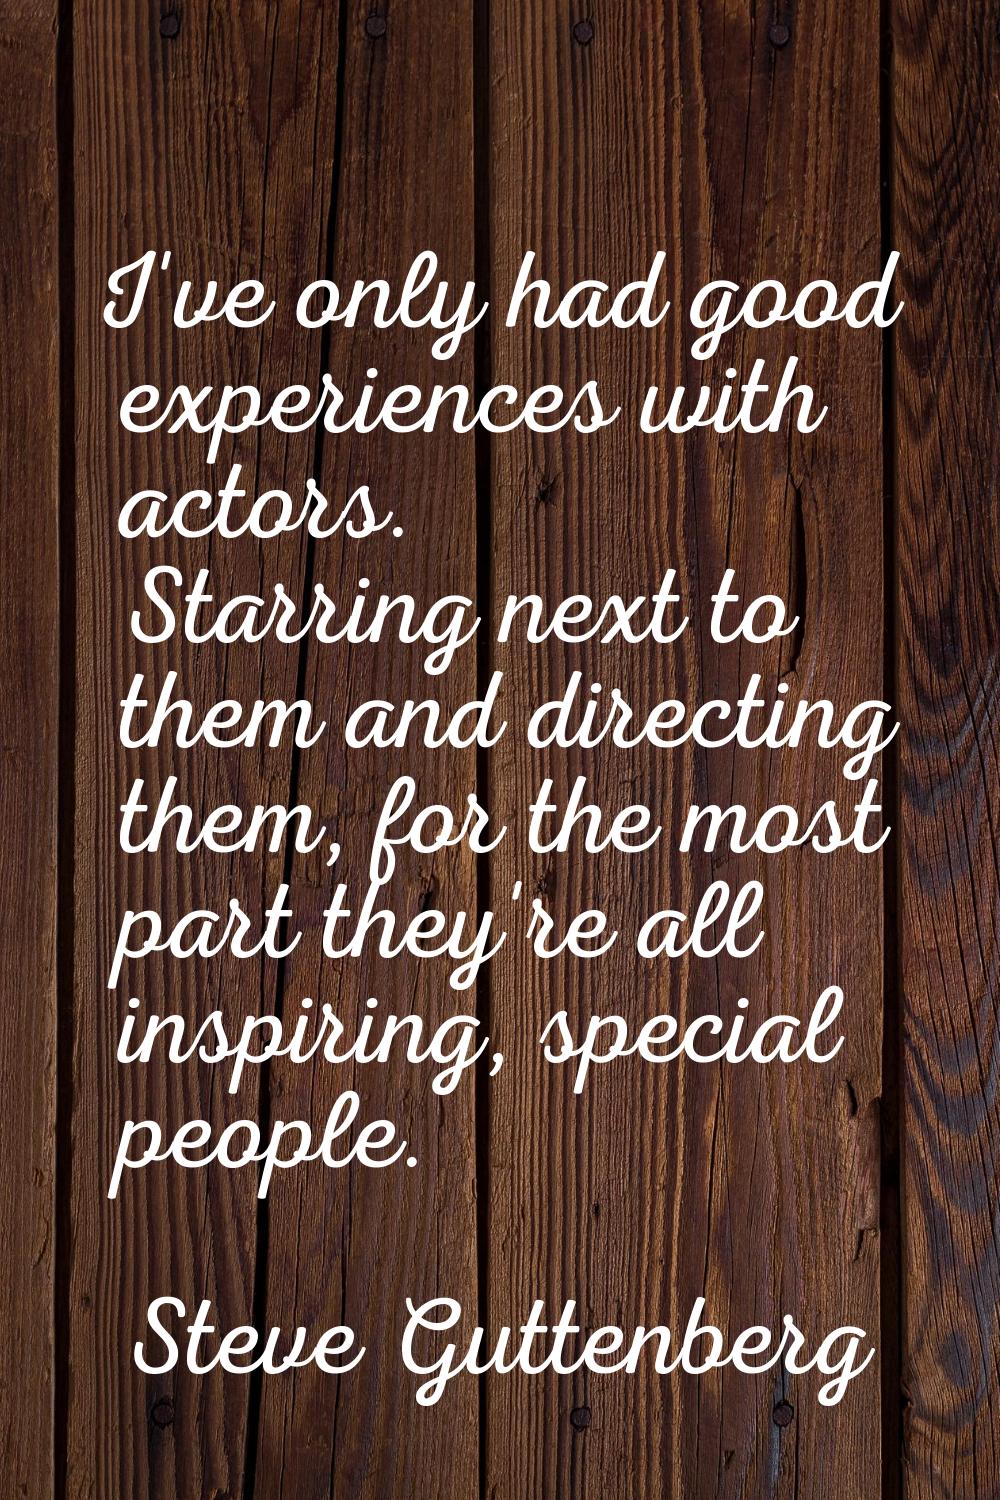 I've only had good experiences with actors. Starring next to them and directing them, for the most 